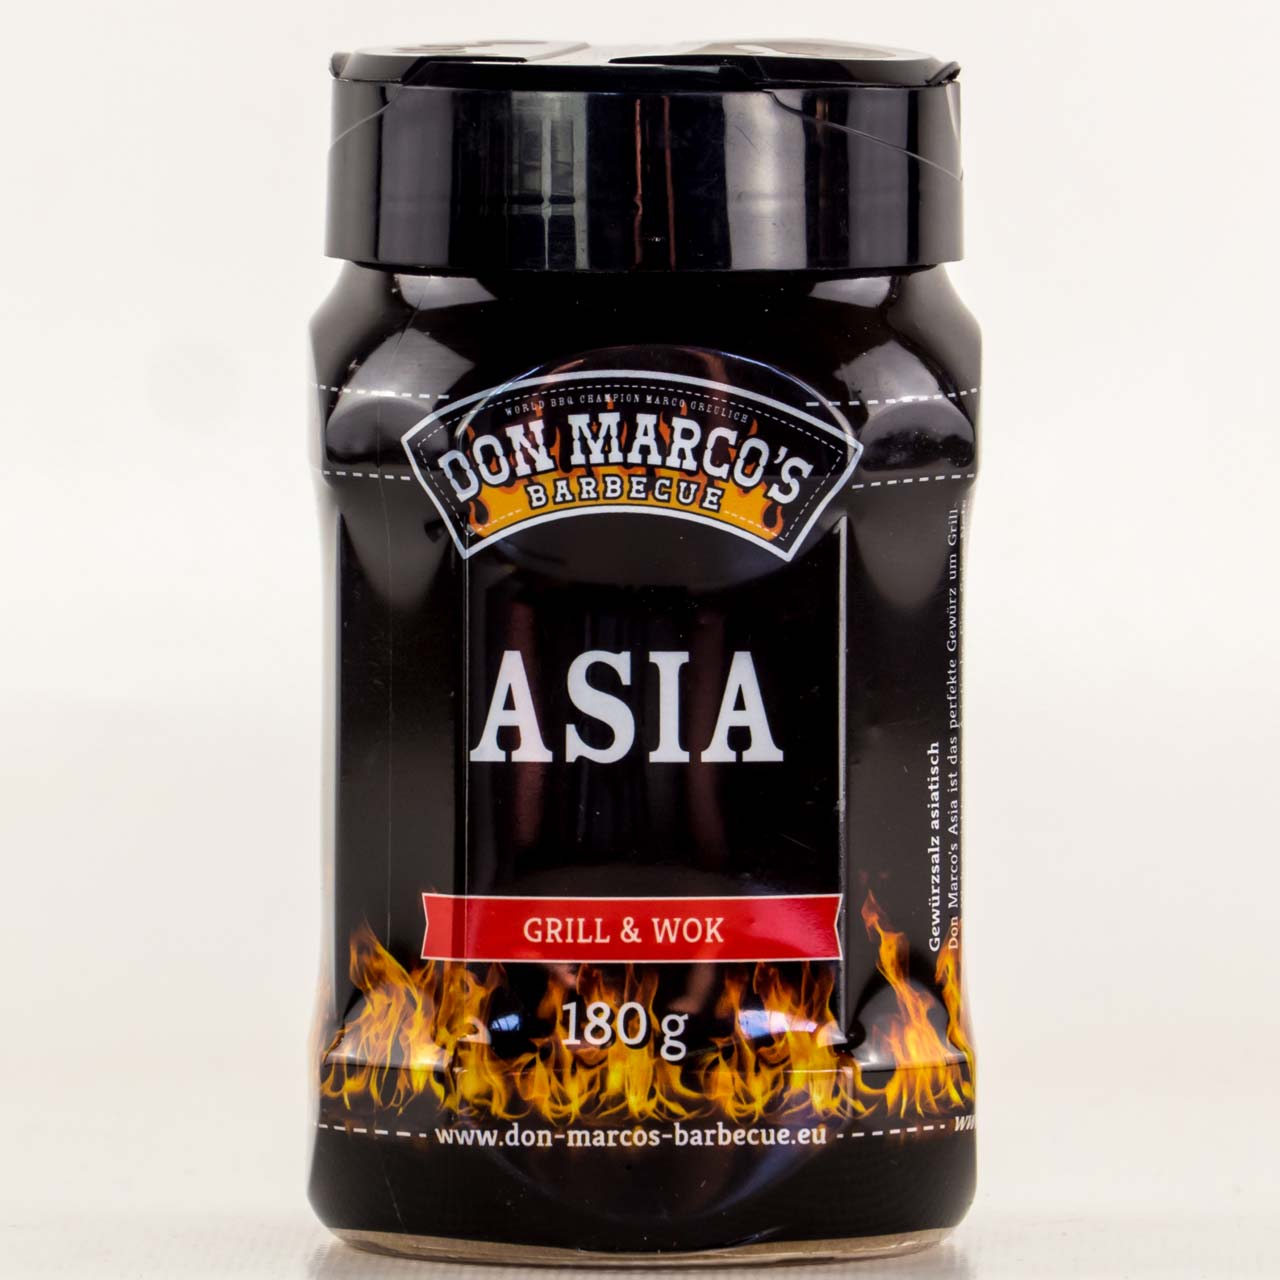 Don Marco's - Asia 180g Streuer